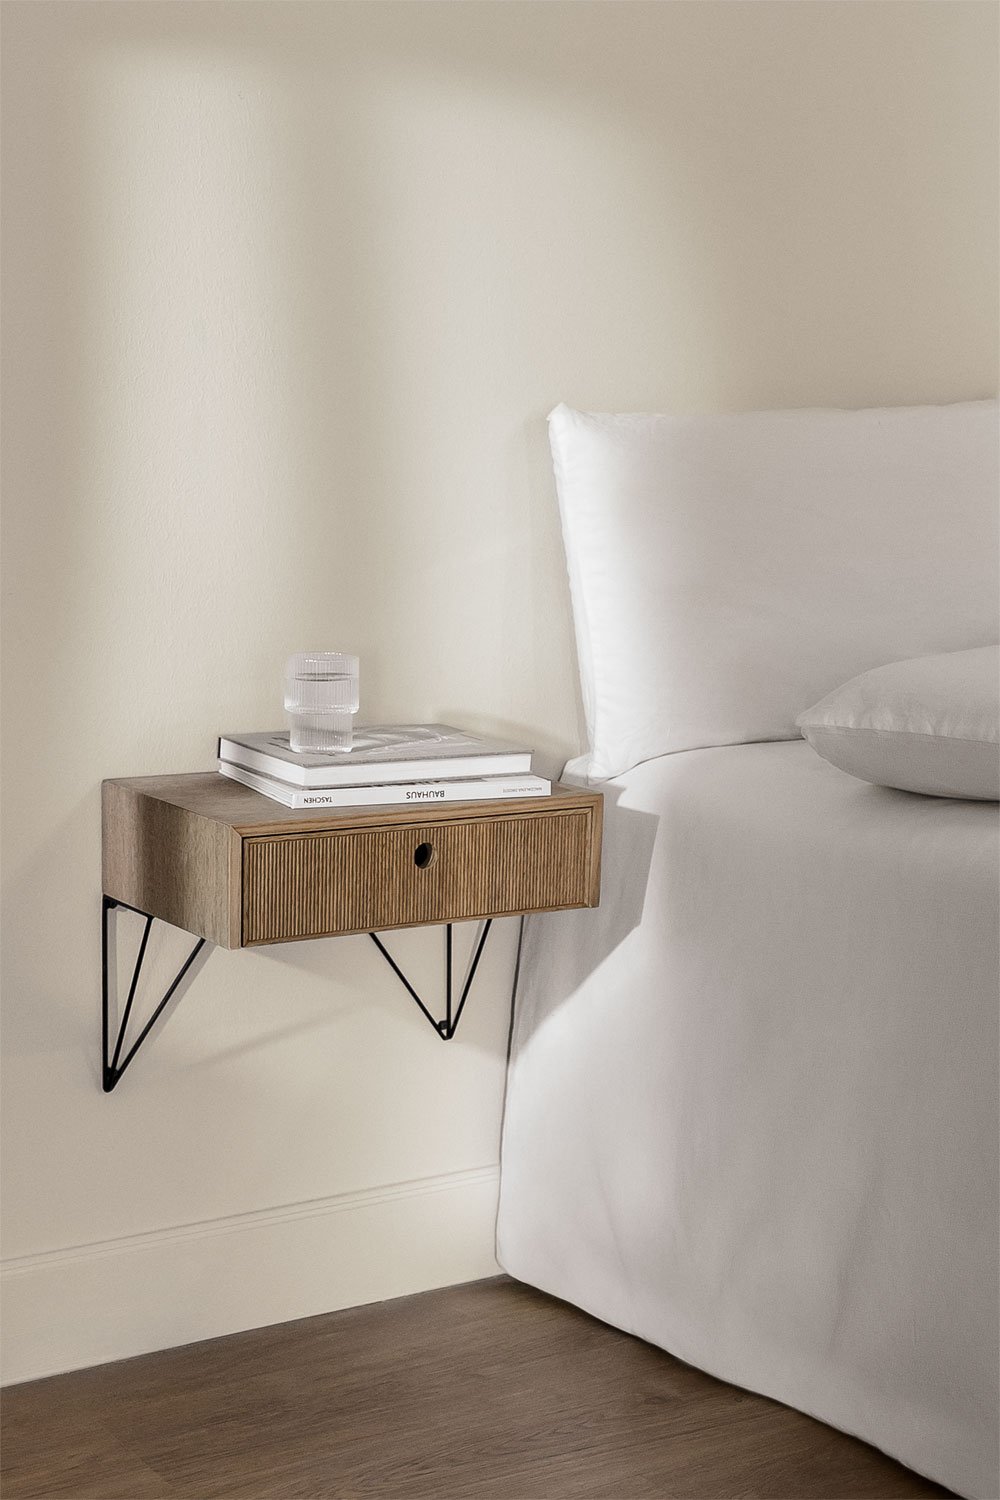 Glai ash wood floating bedside table, gallery image 1